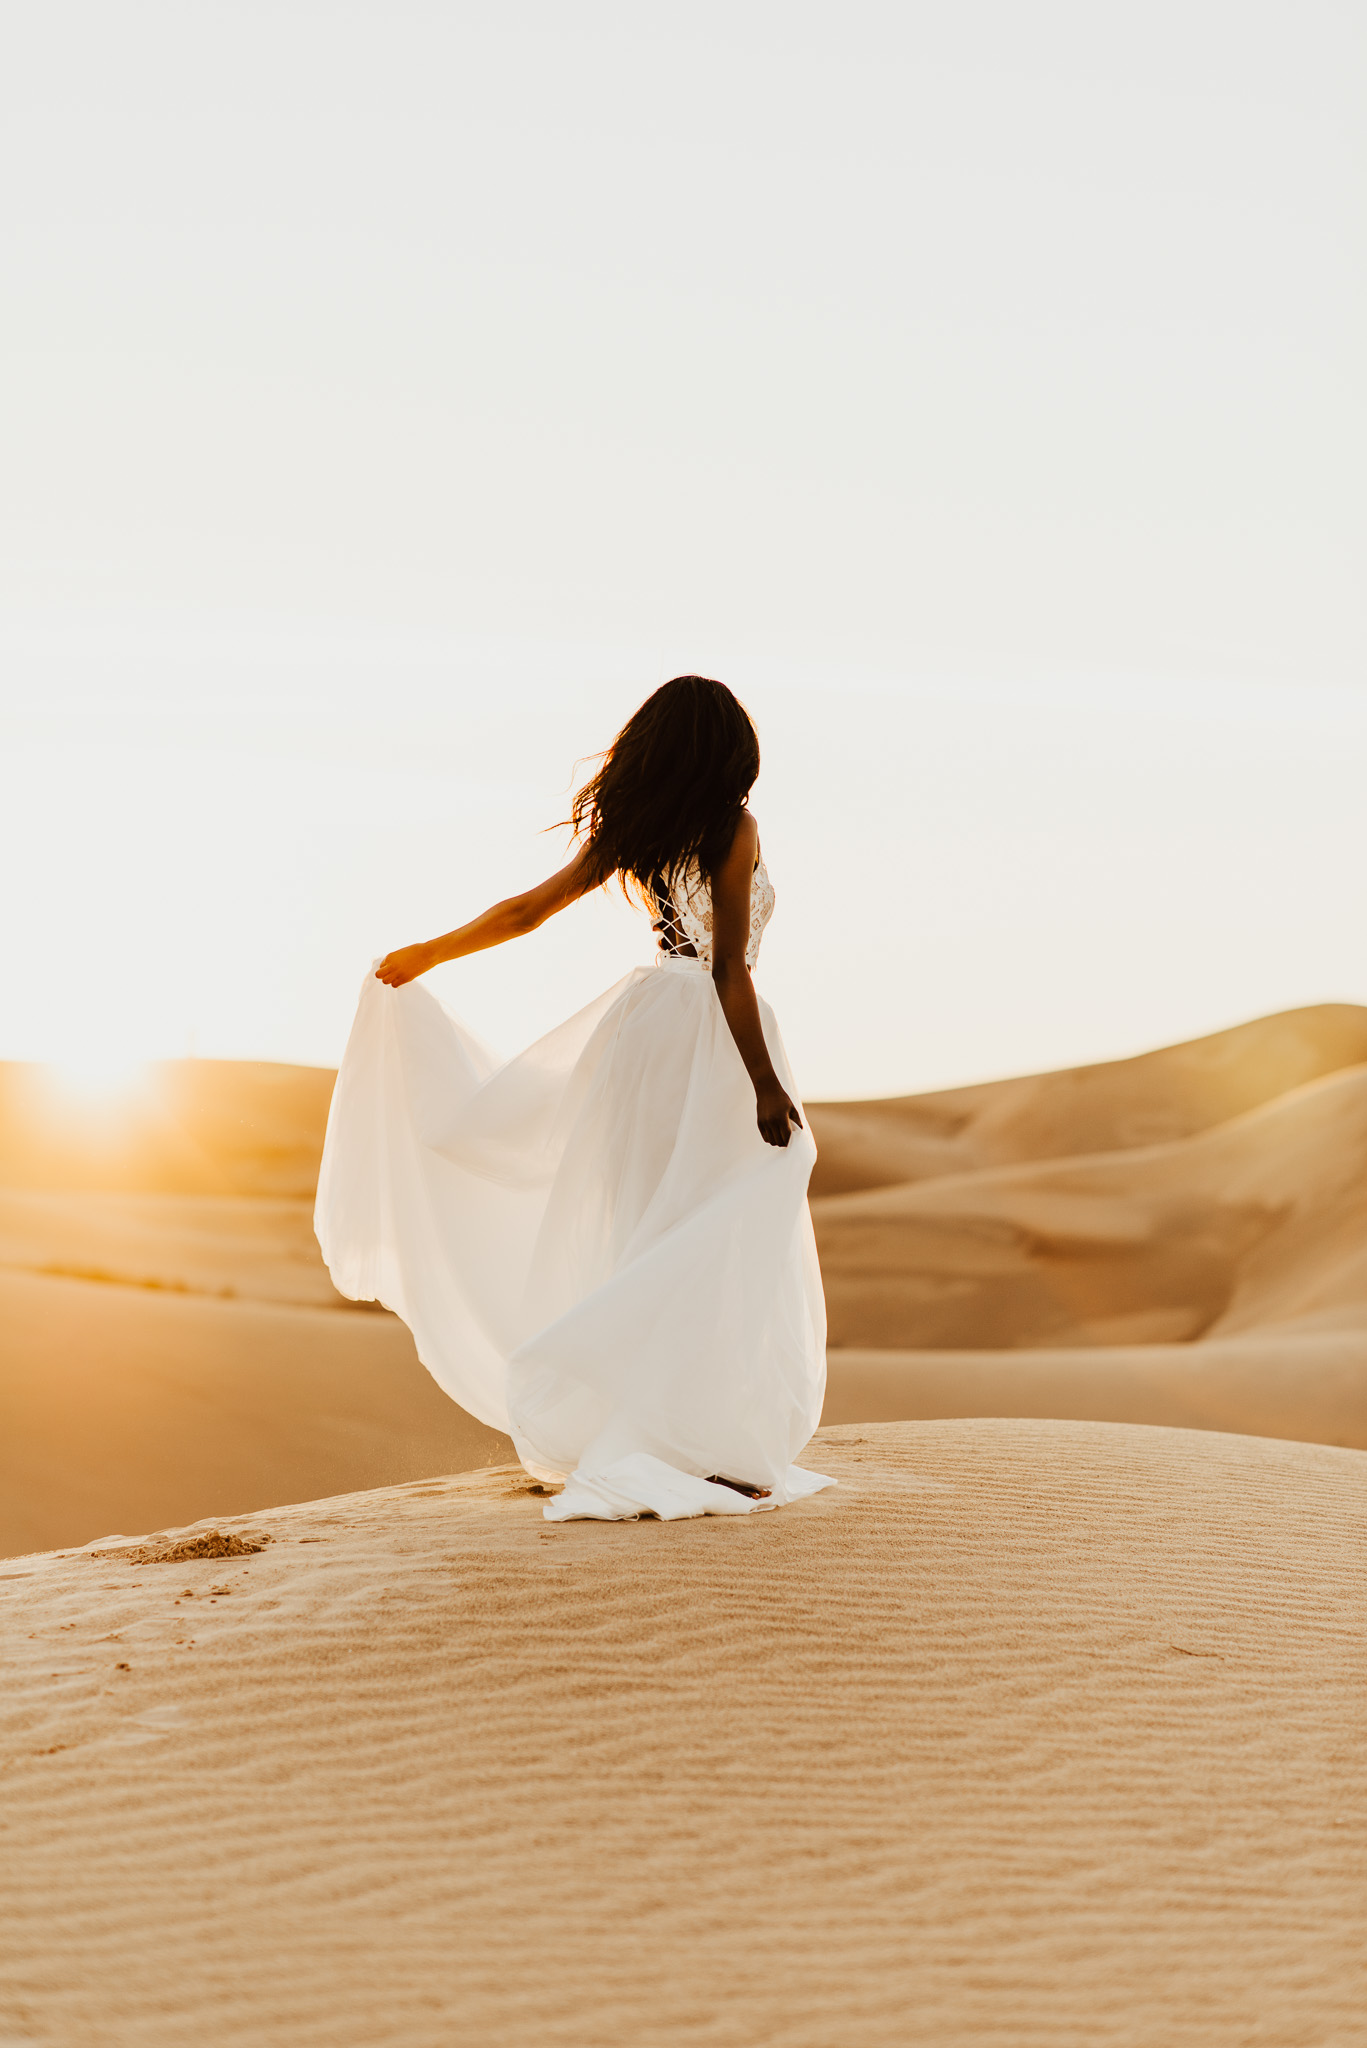 Bride at the sand dunes